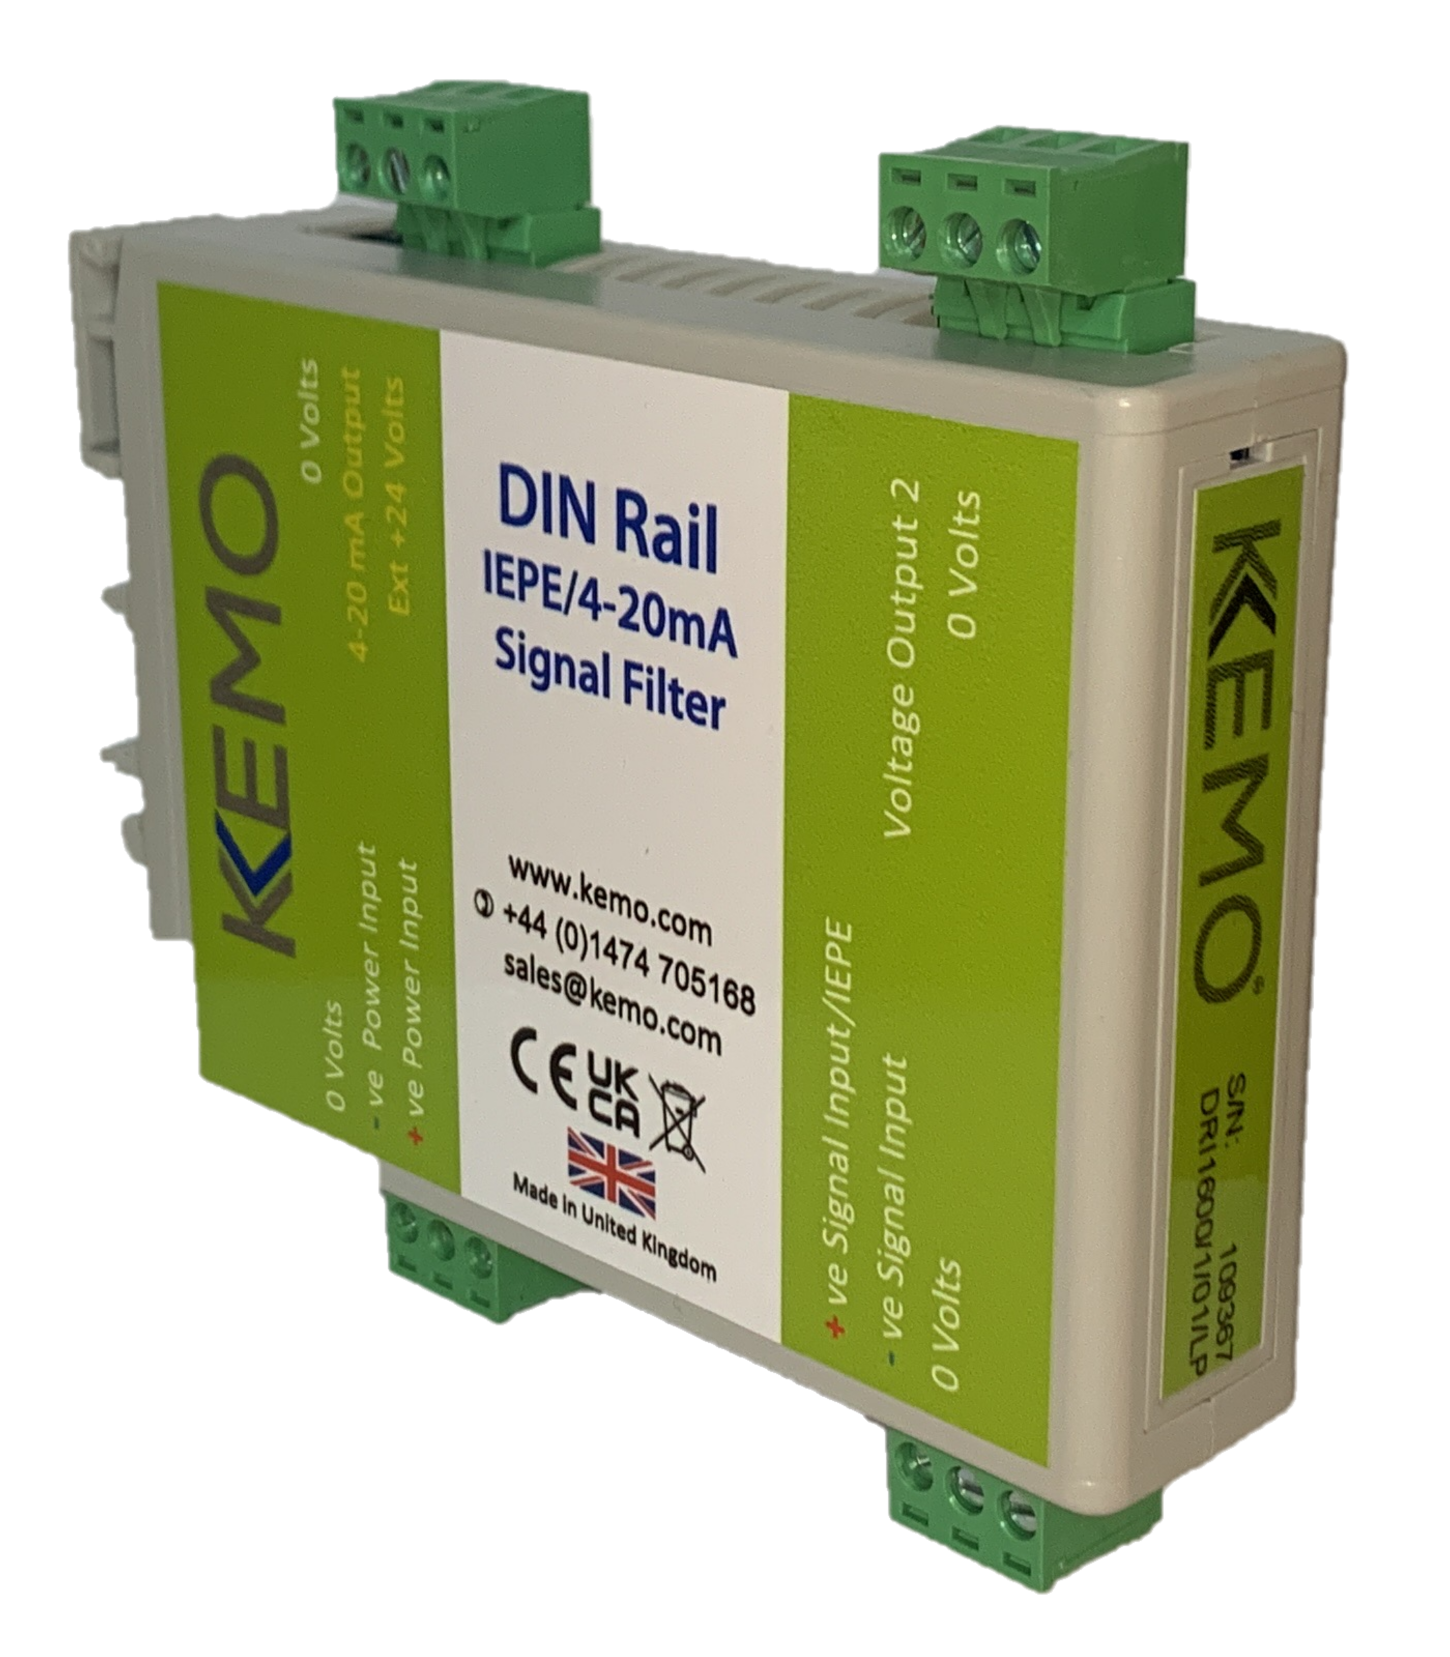 DIN Rail Filters DR1200 and DR1600